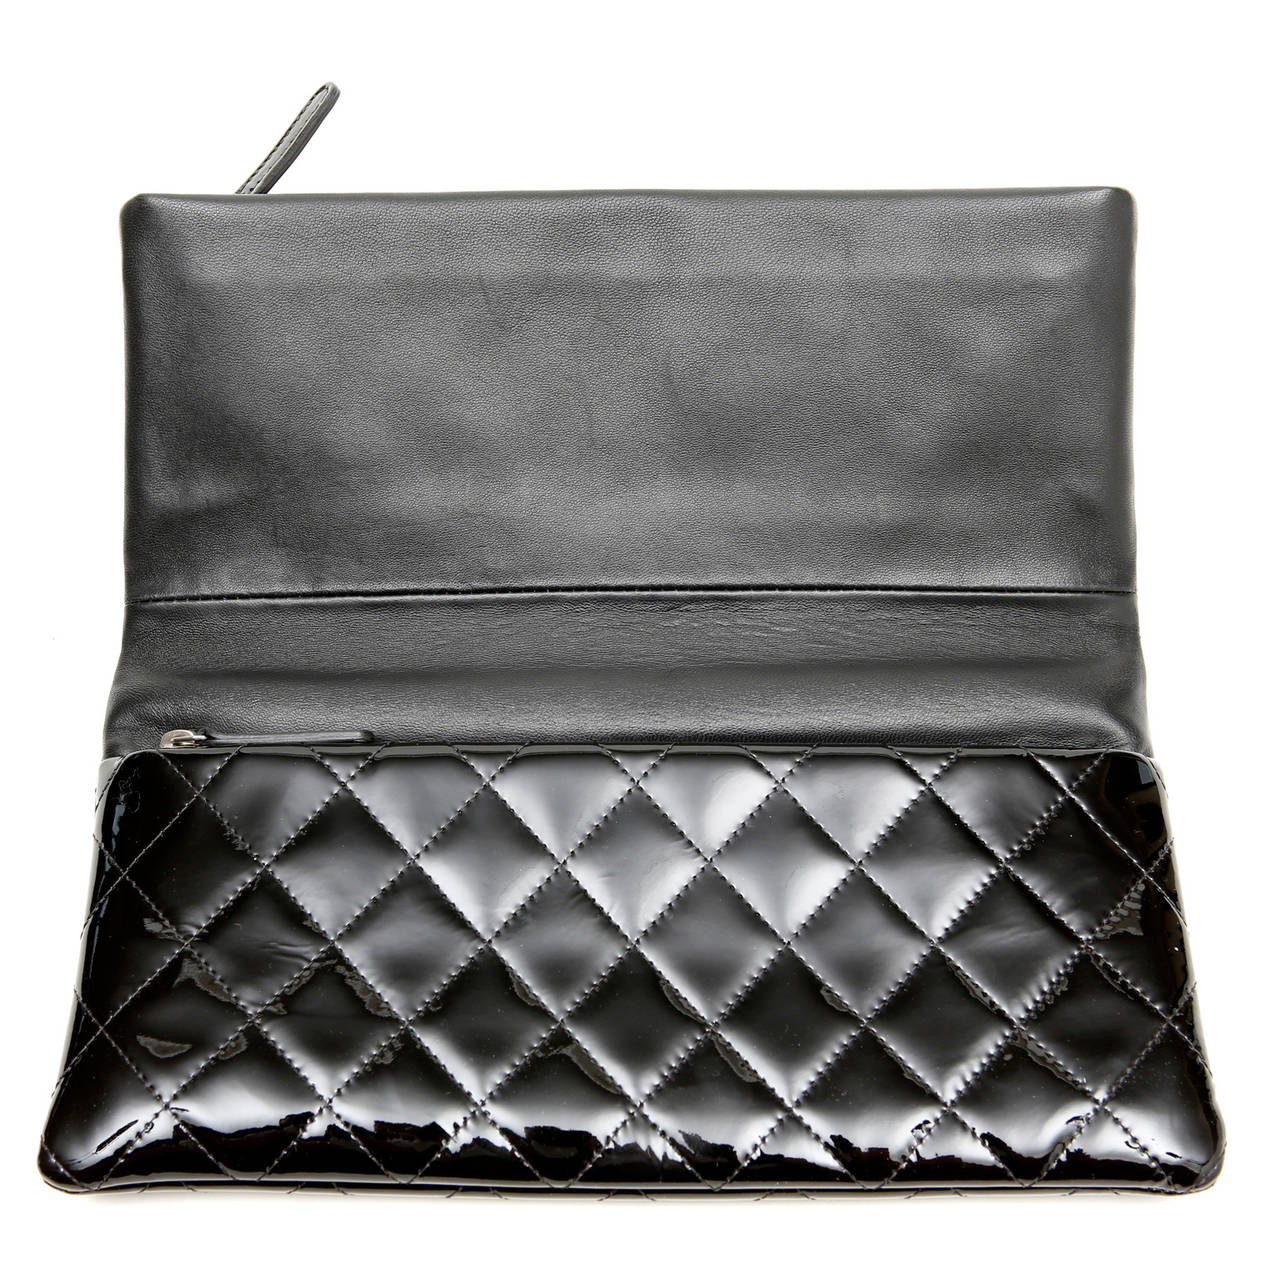 Chanel Black Quilted Patent Leather Clutch 2